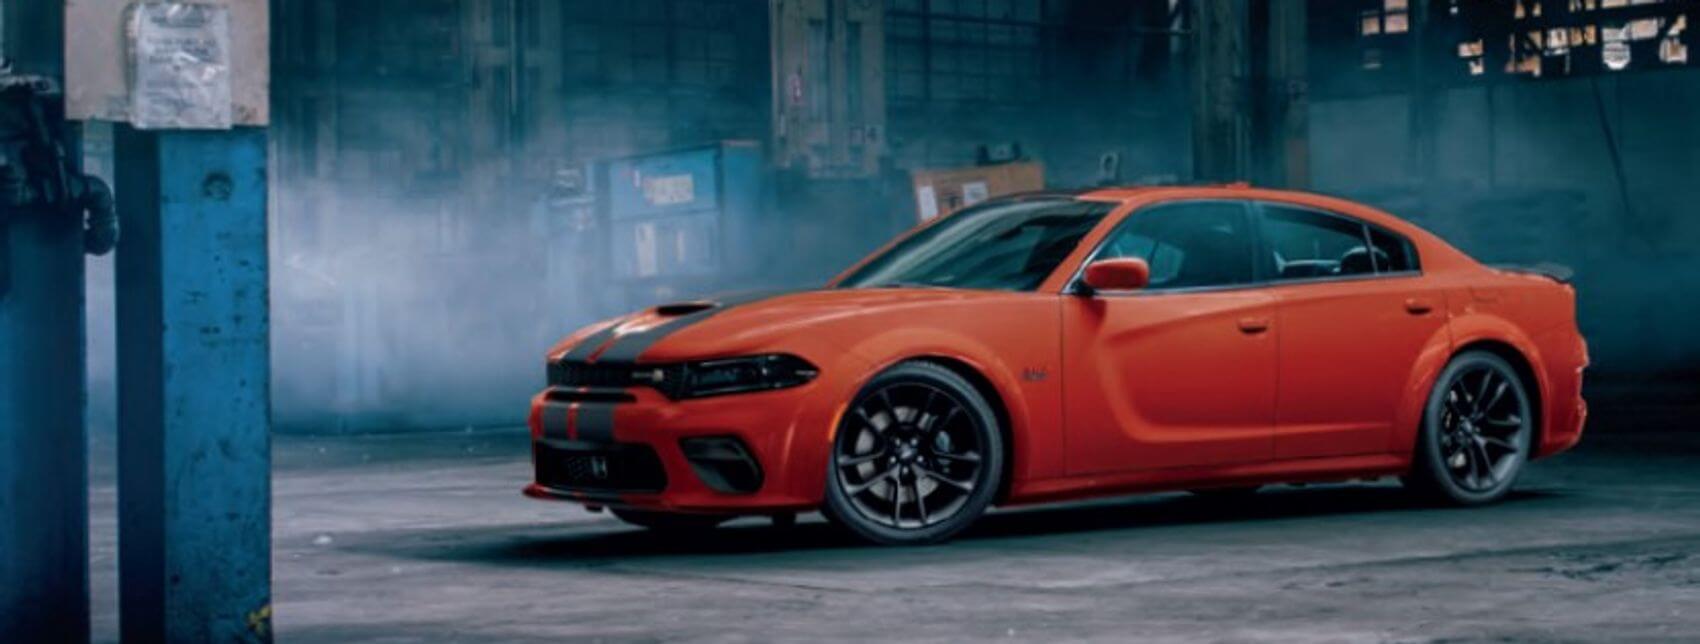 Dodge Charger in garage